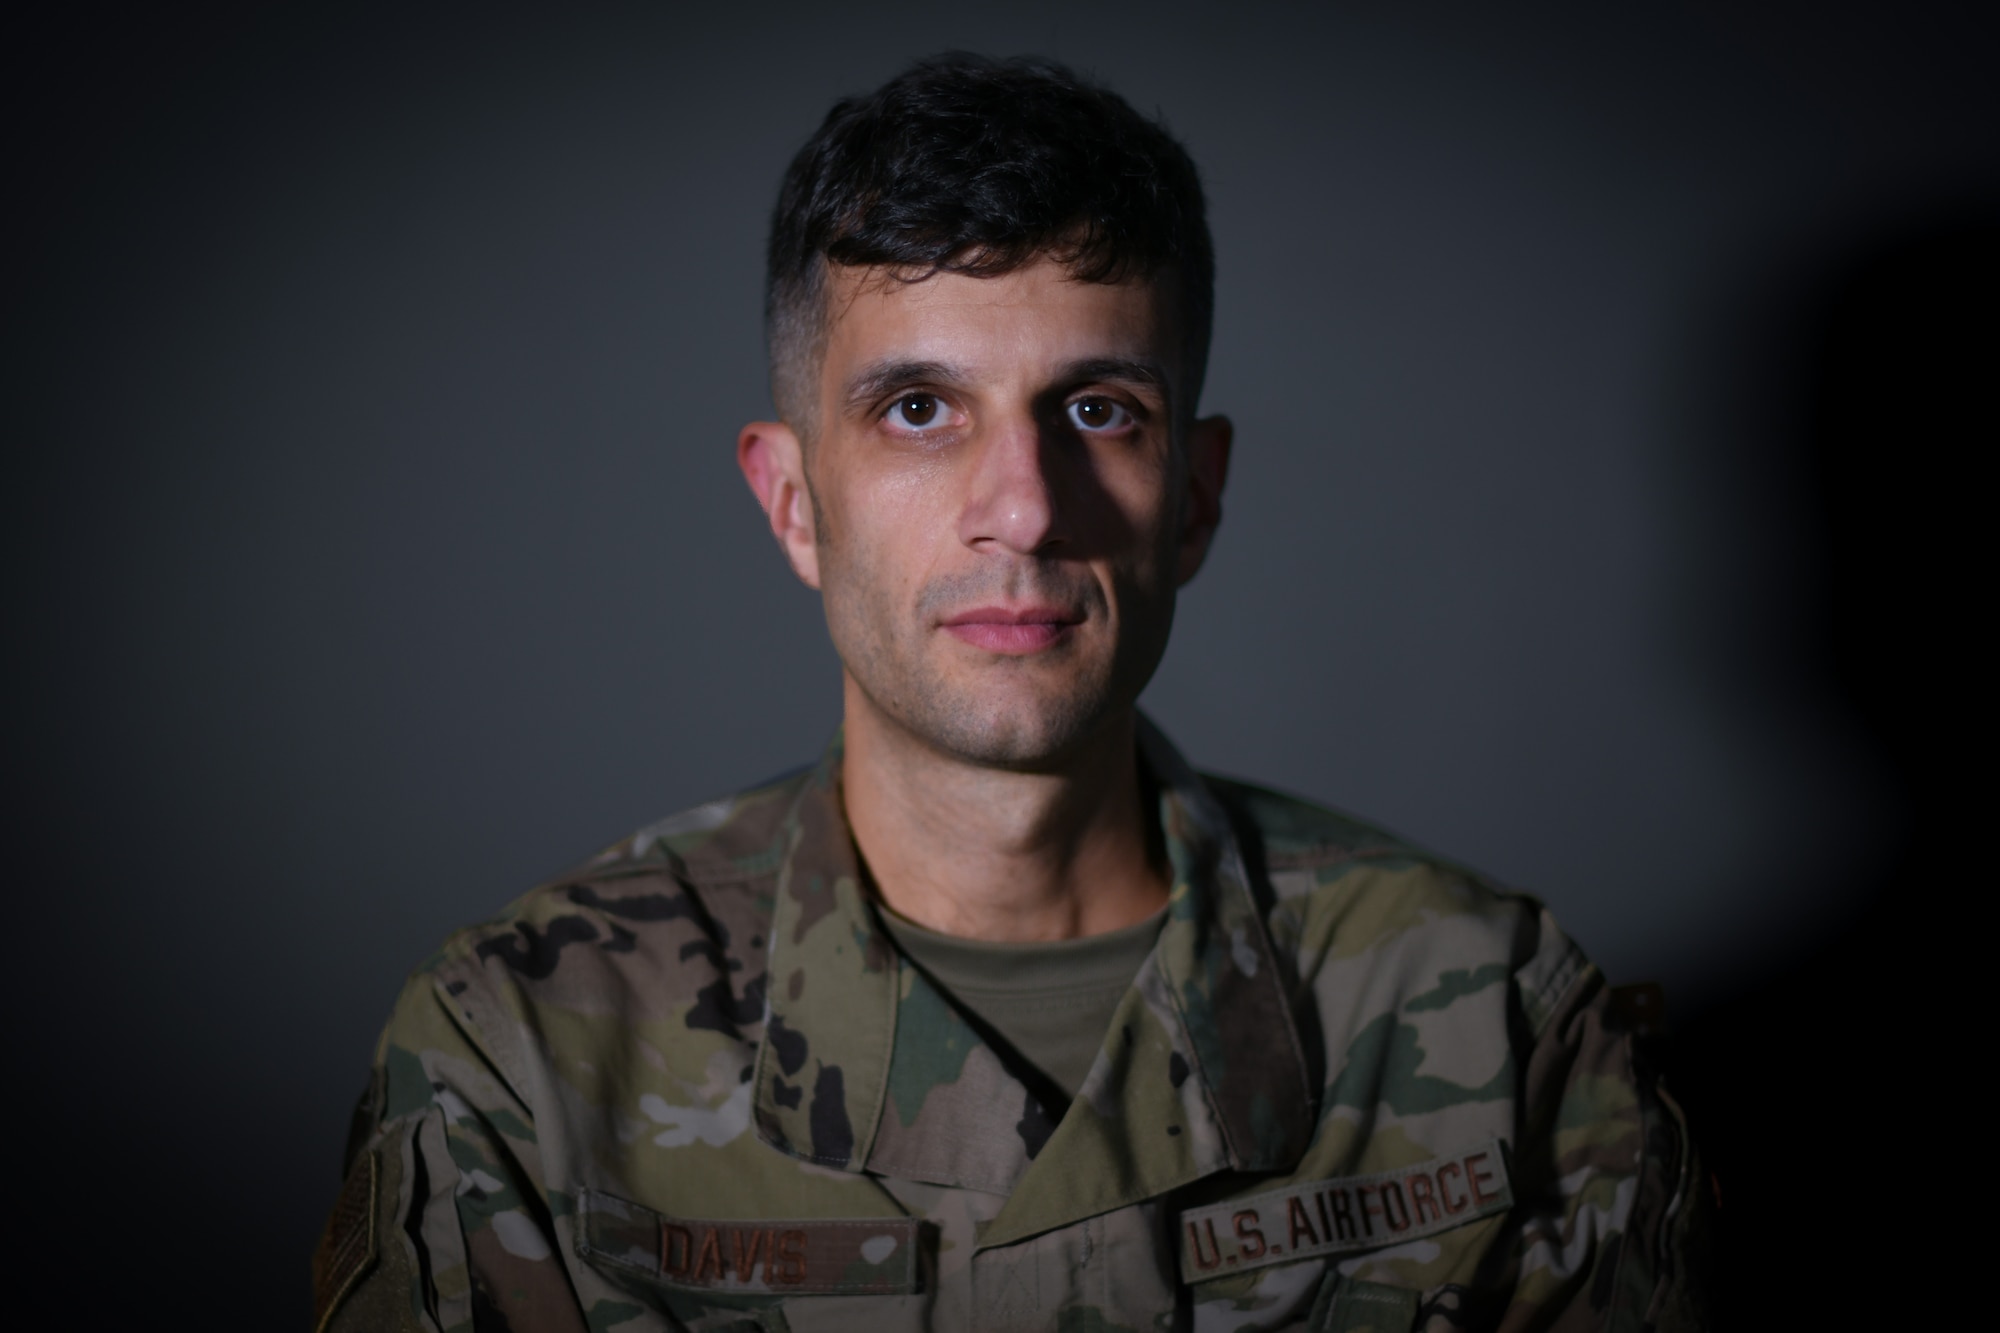 Military member poses for photo against dark grey background.